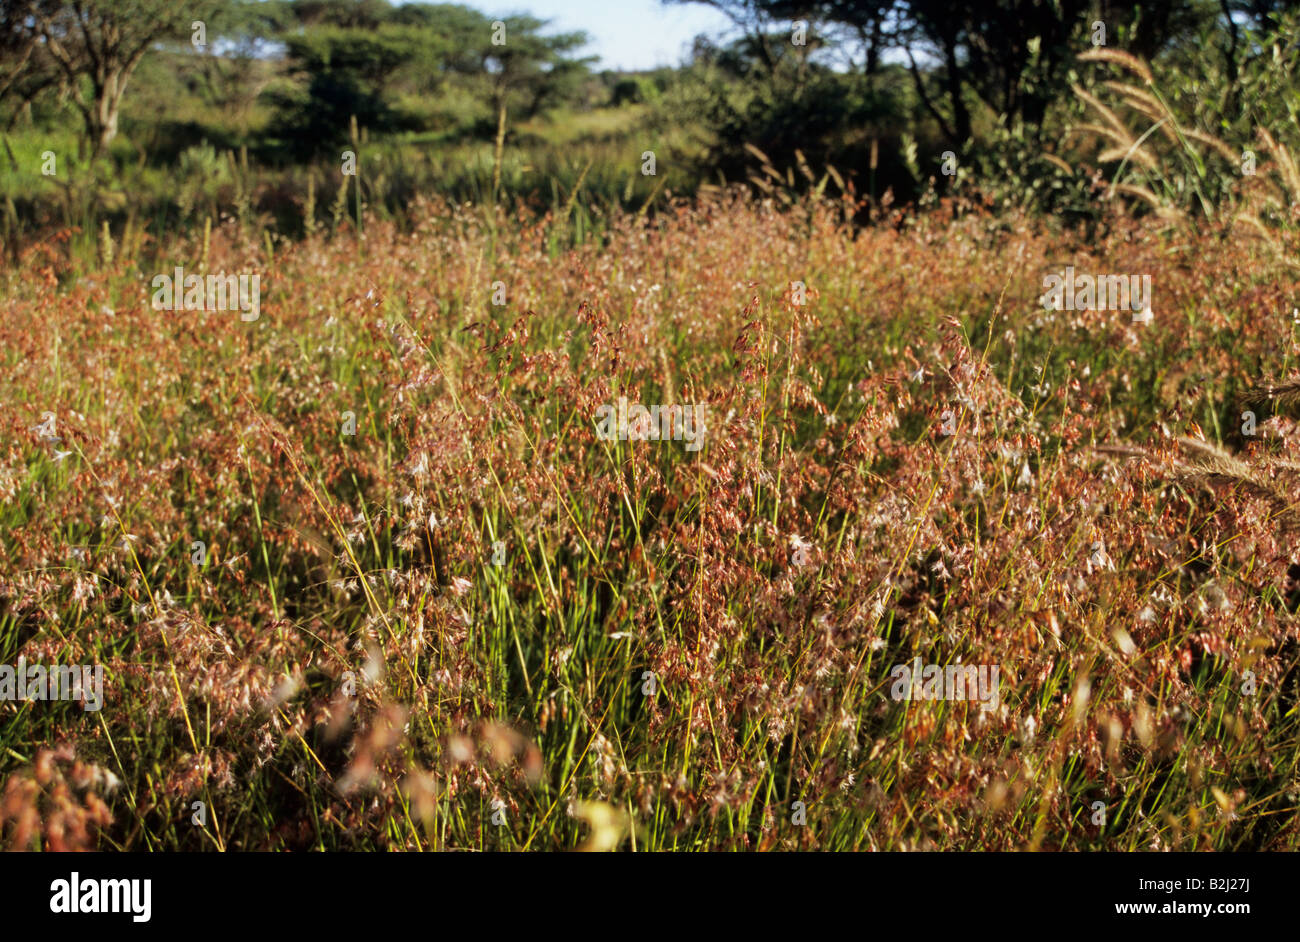 Namibia, beautiful landscape, grunge, close up of wild grass, growth of natural pasture on farm, backgrounds, African landscapes Stock Photo